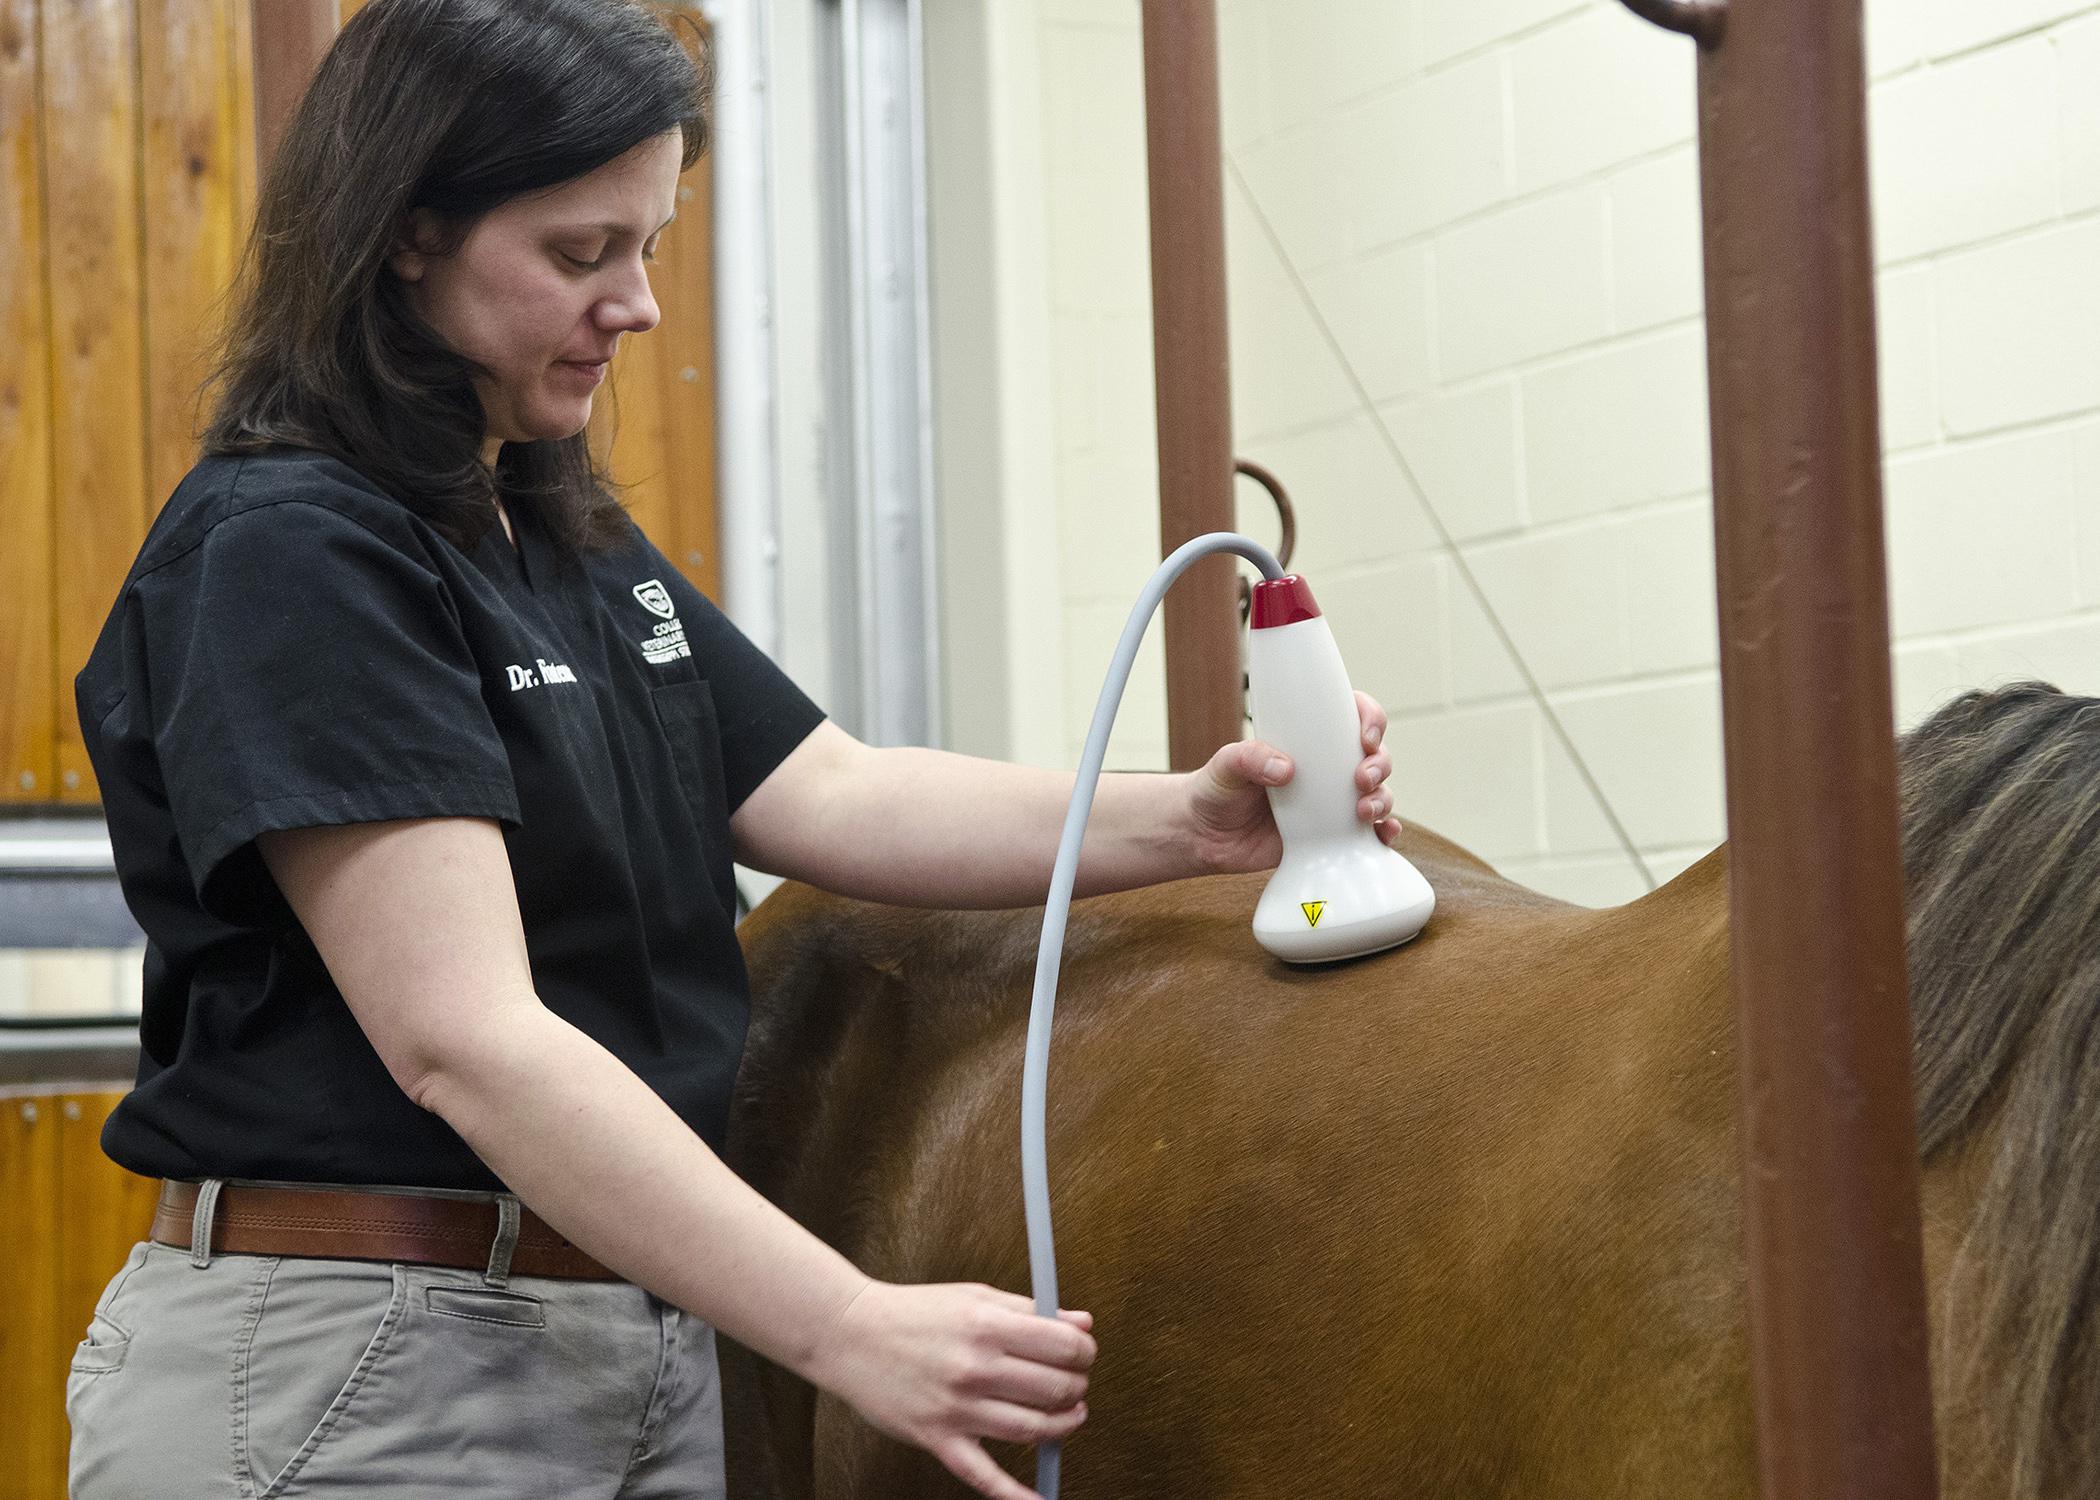 Dr. Robin Fontenot, assistant clinical professor at the Mississippi State University College of Veterinary Medicine, administers shock-wave therapy to an equine patient to help resolve back pain issues. (Photo by MSU College of Veterinary Medicine/Tom Thompson)